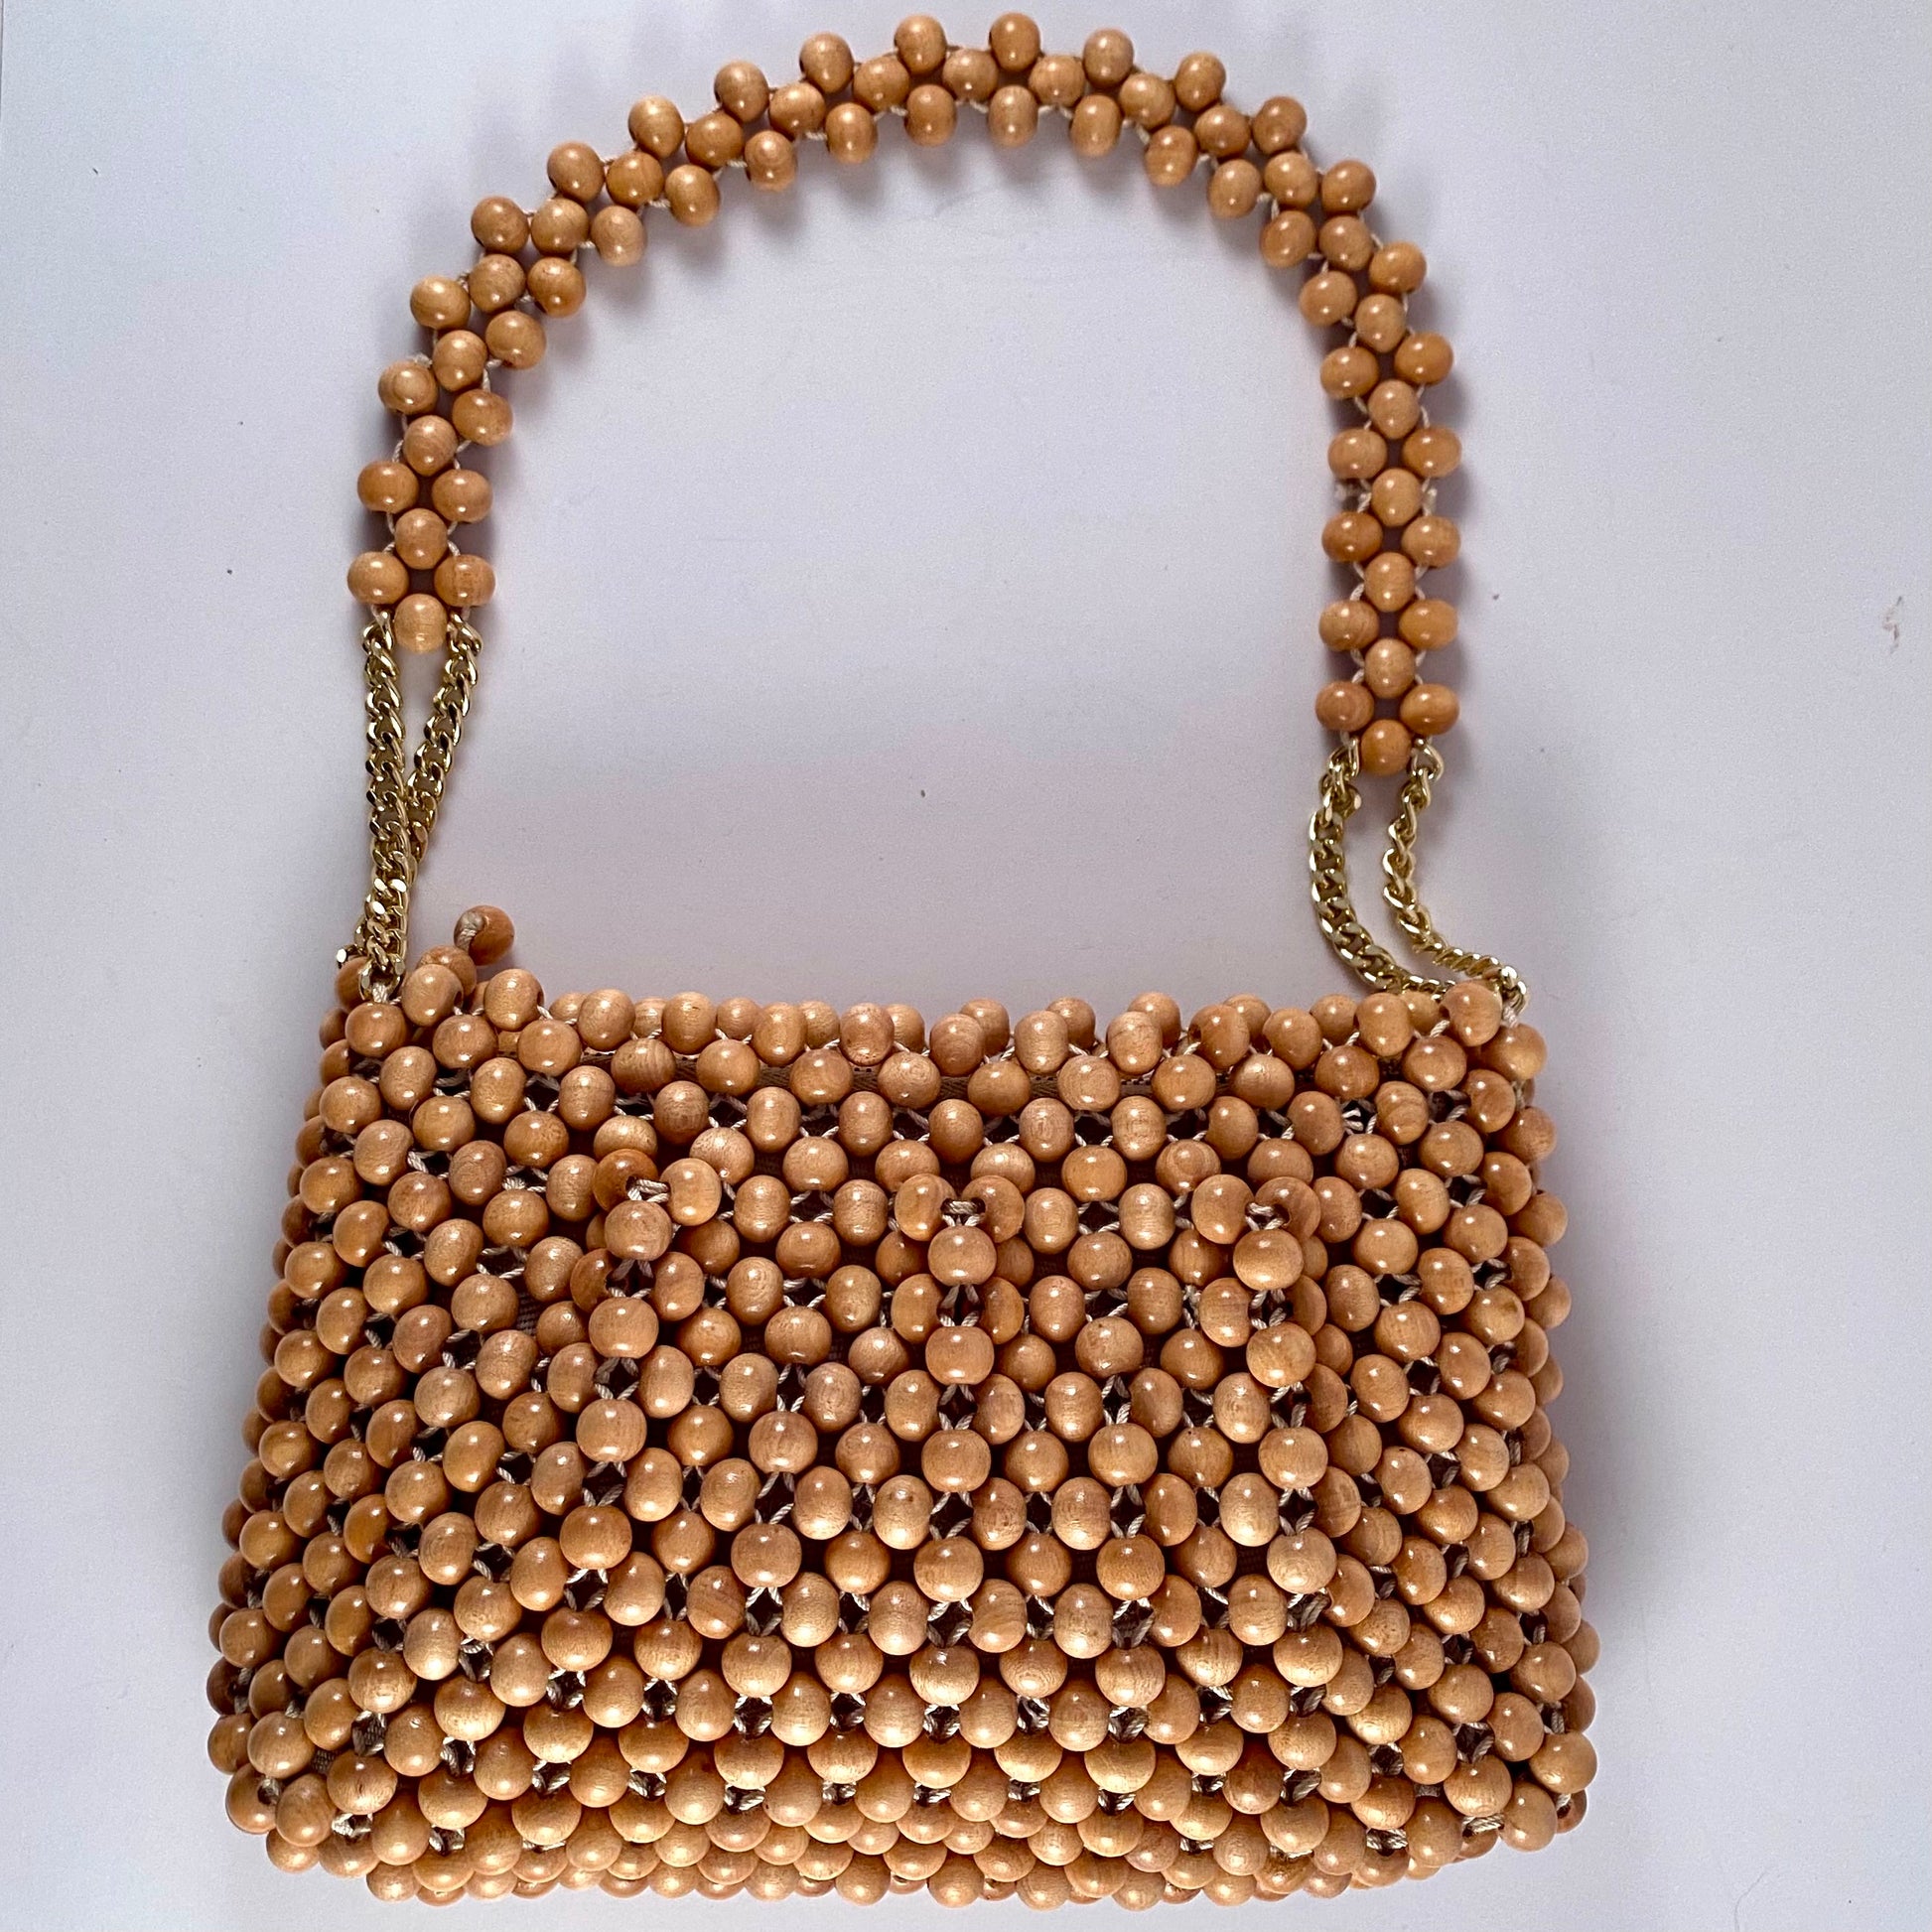 Beaded Purse, made in Hong Kong, interior AS IS For Sale